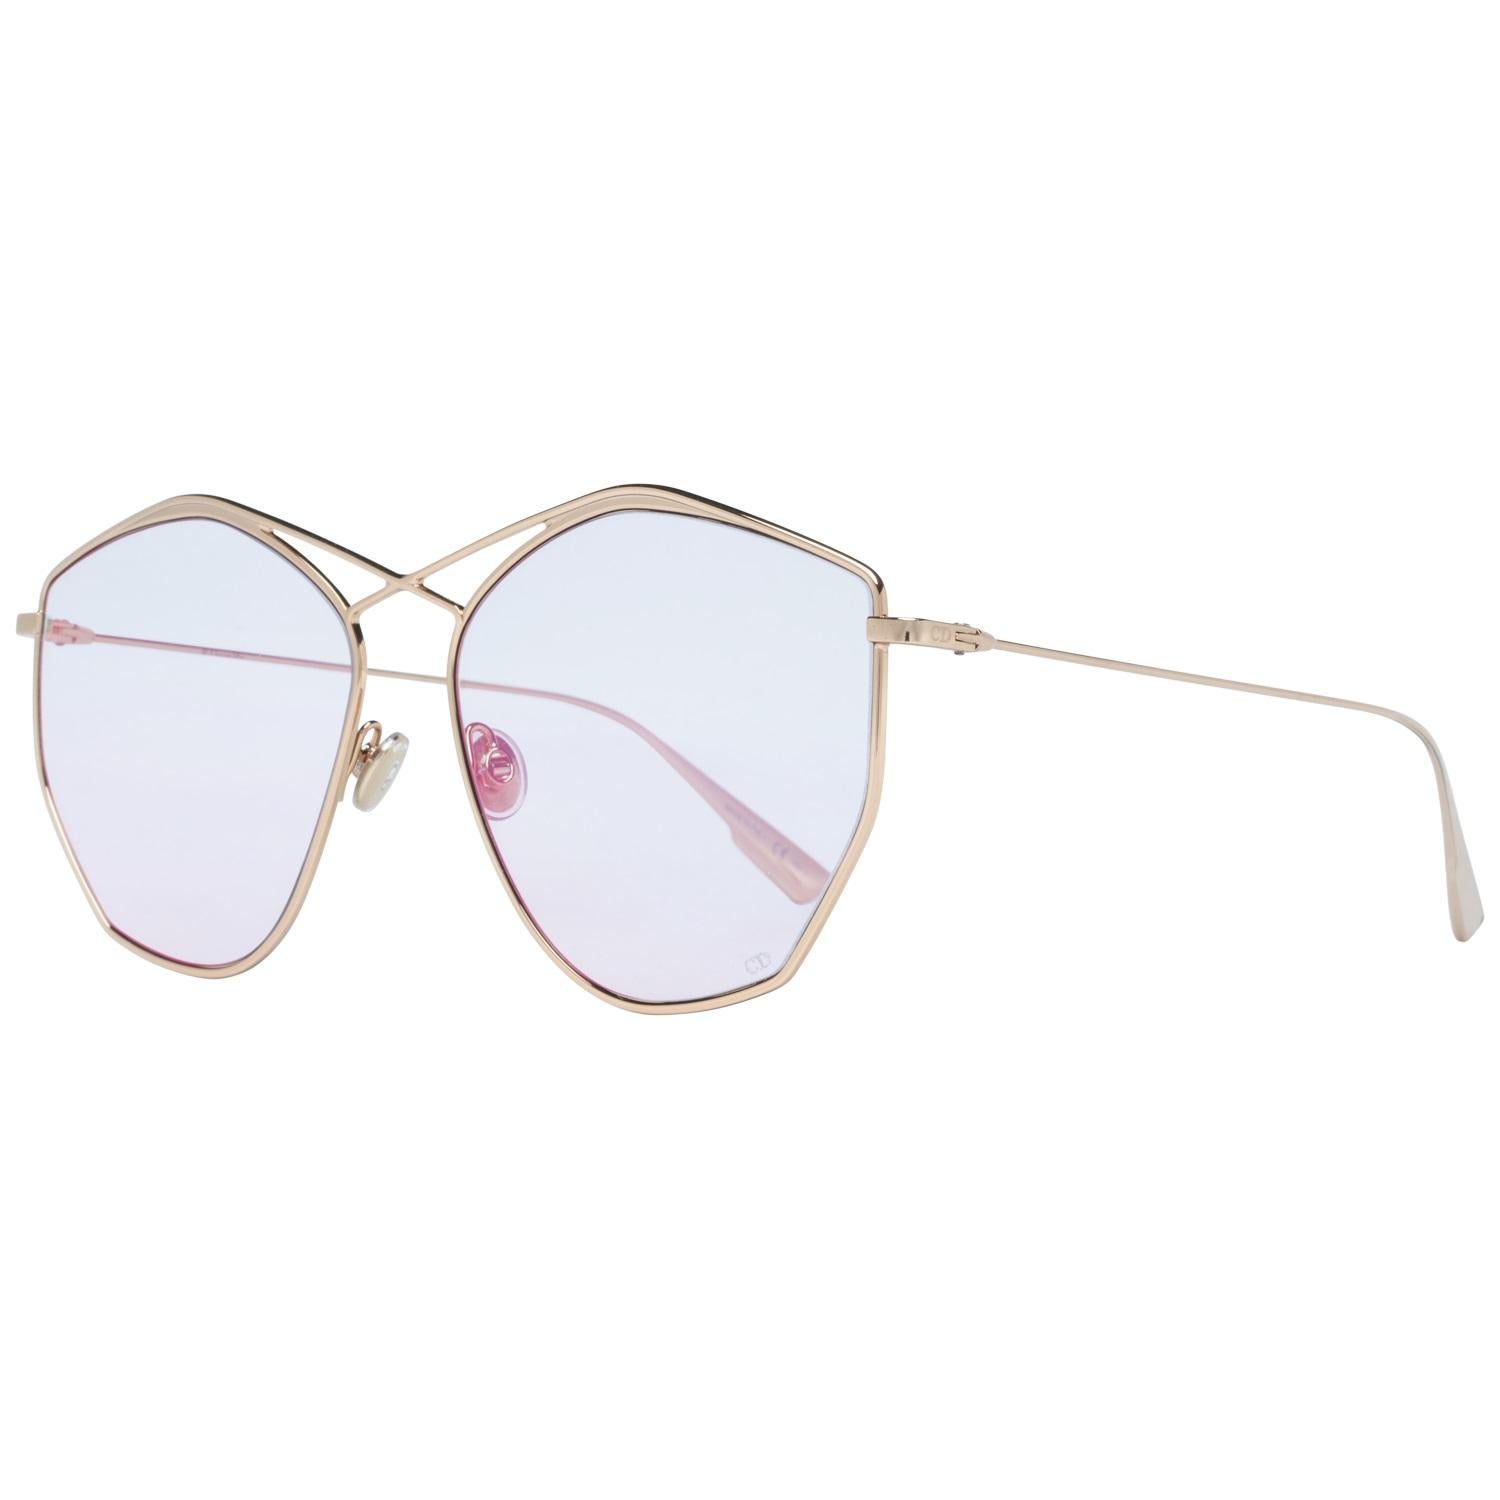 Details

MATERIAL: Metal

COLOR: Gold

MODEL: Diorstellaire4 000TE59

GENDER: Women

COUNTRY OF MANUFACTURE: Italy

TYPE: Sunglasses

ORIGINAL CASE?: Yes

STYLE: Oval

OCCASION: Casual

FEATURES: Lightweight

LENS COLOR: Pink

LENS TECHNOLOGY: